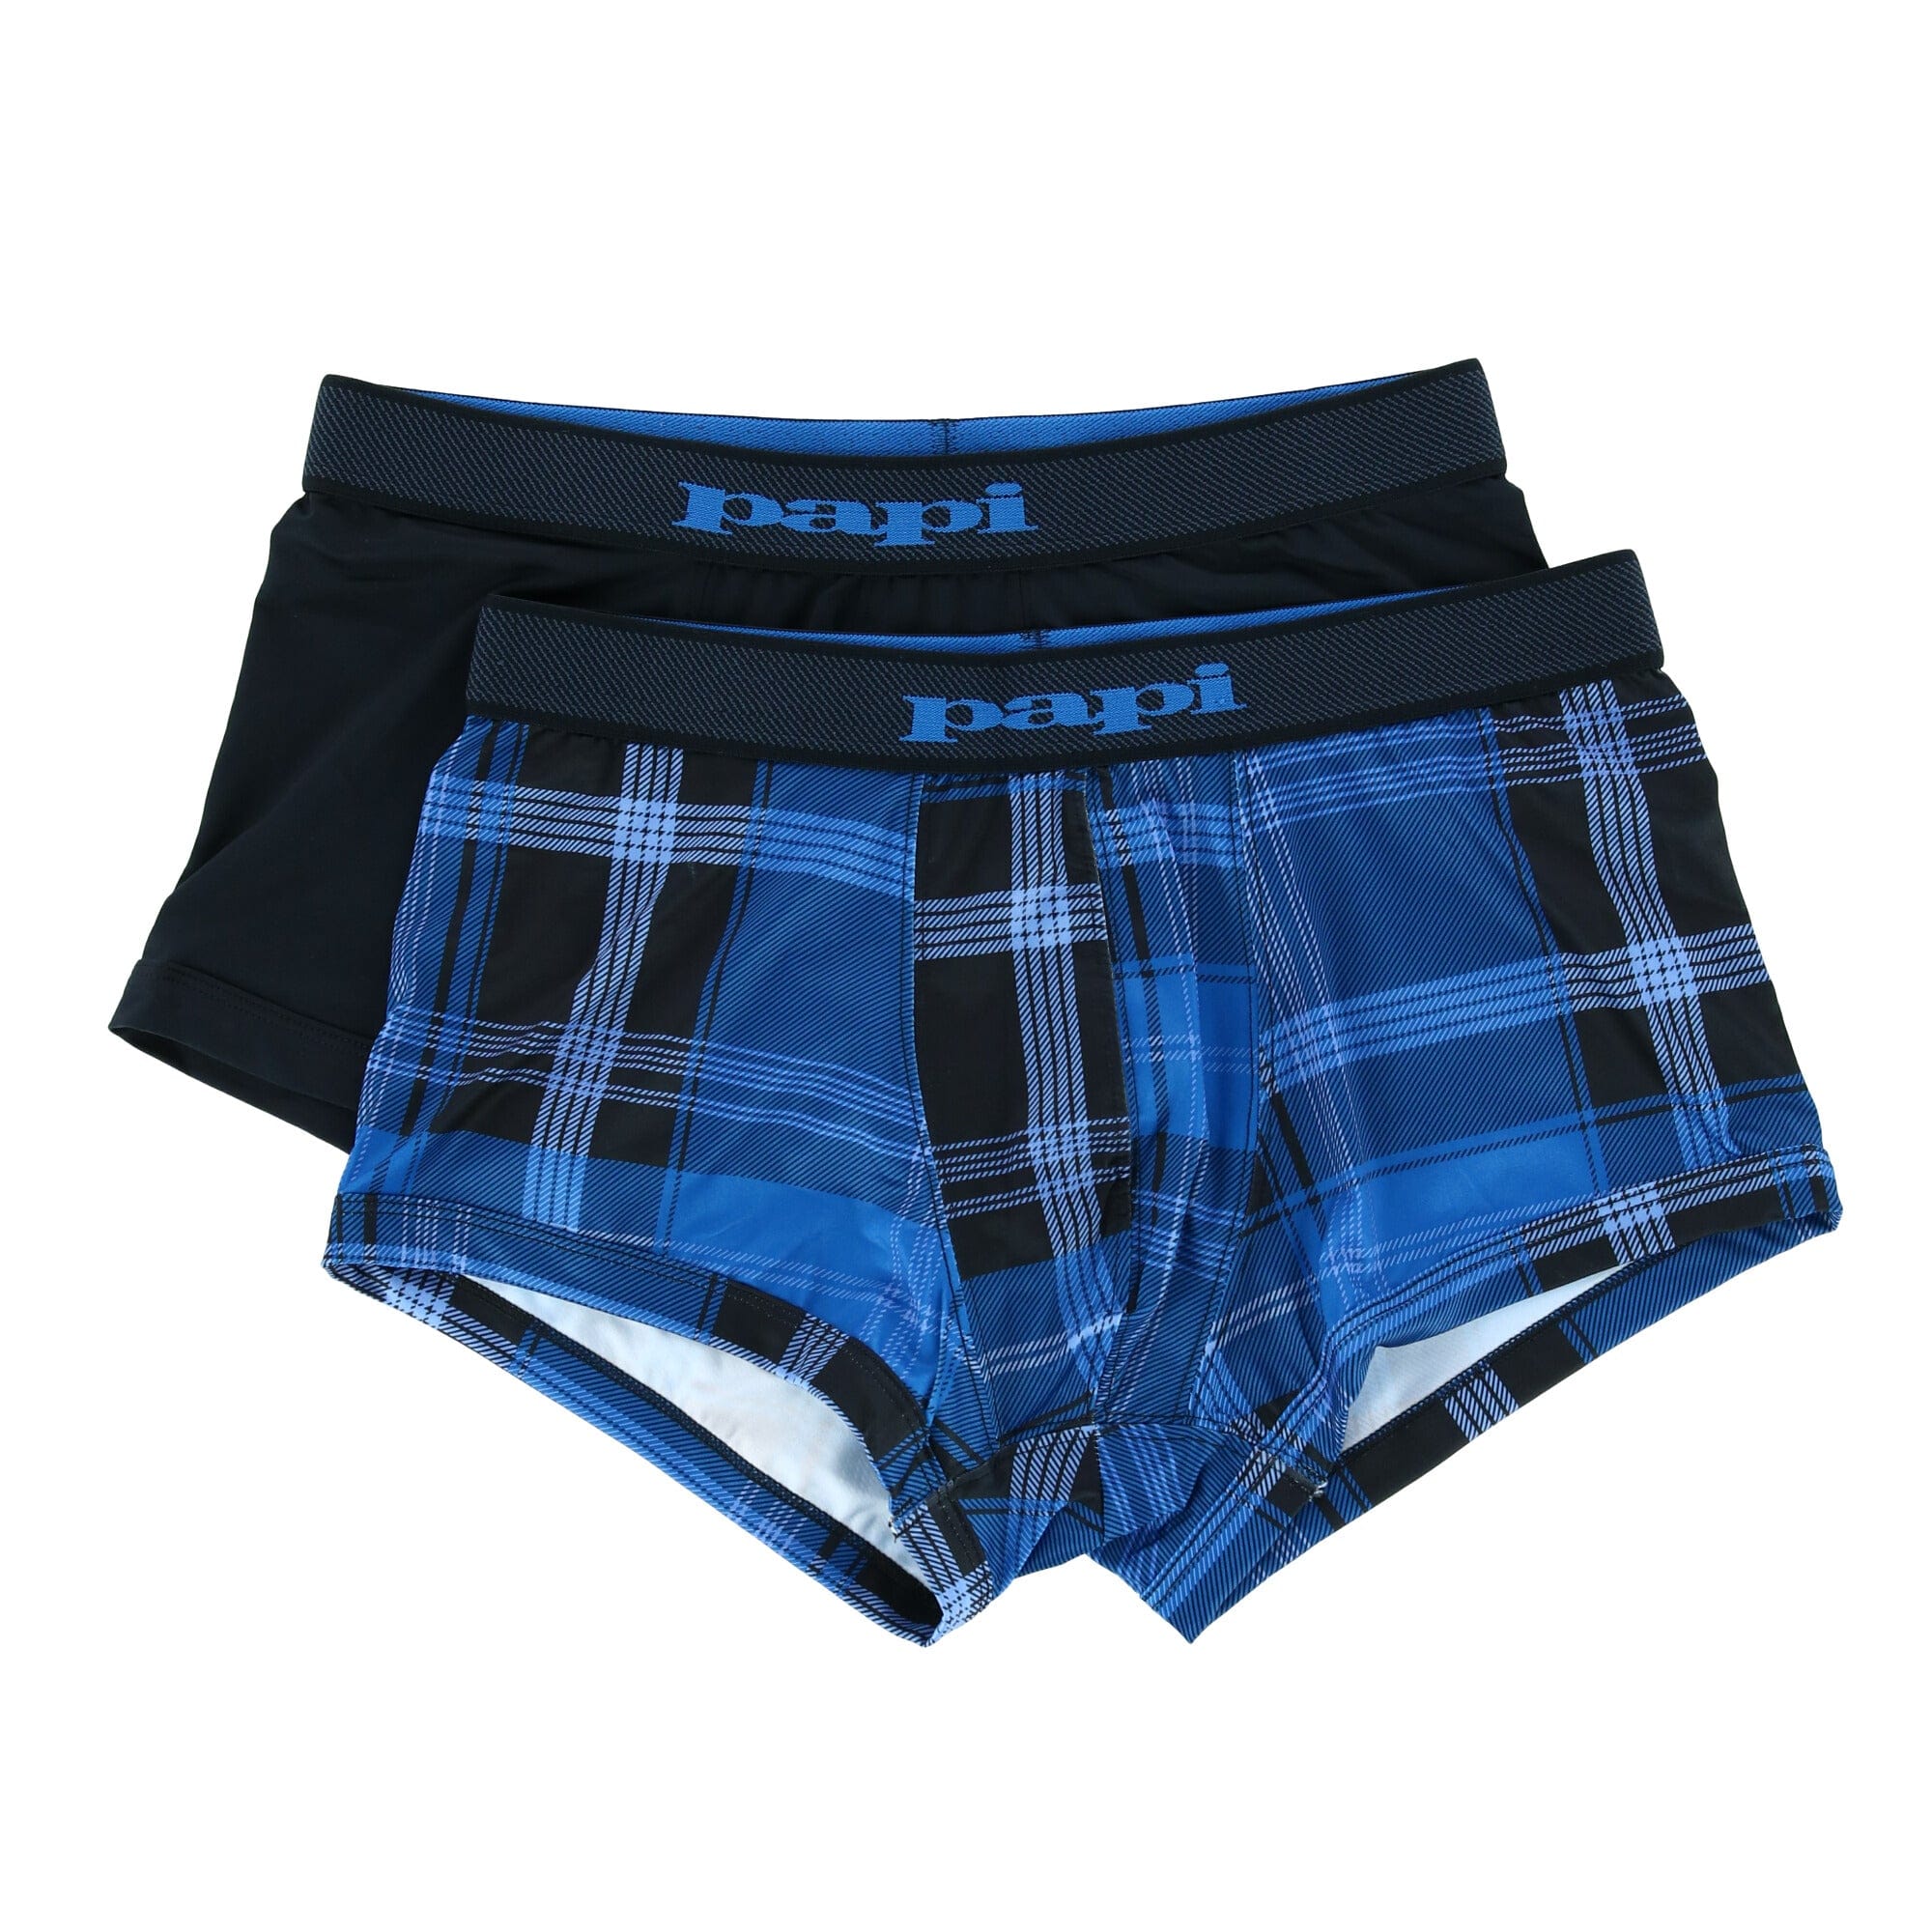 Men's Brazilian Cut Plaid and Solid Underwear Trunks (2 Pack) by